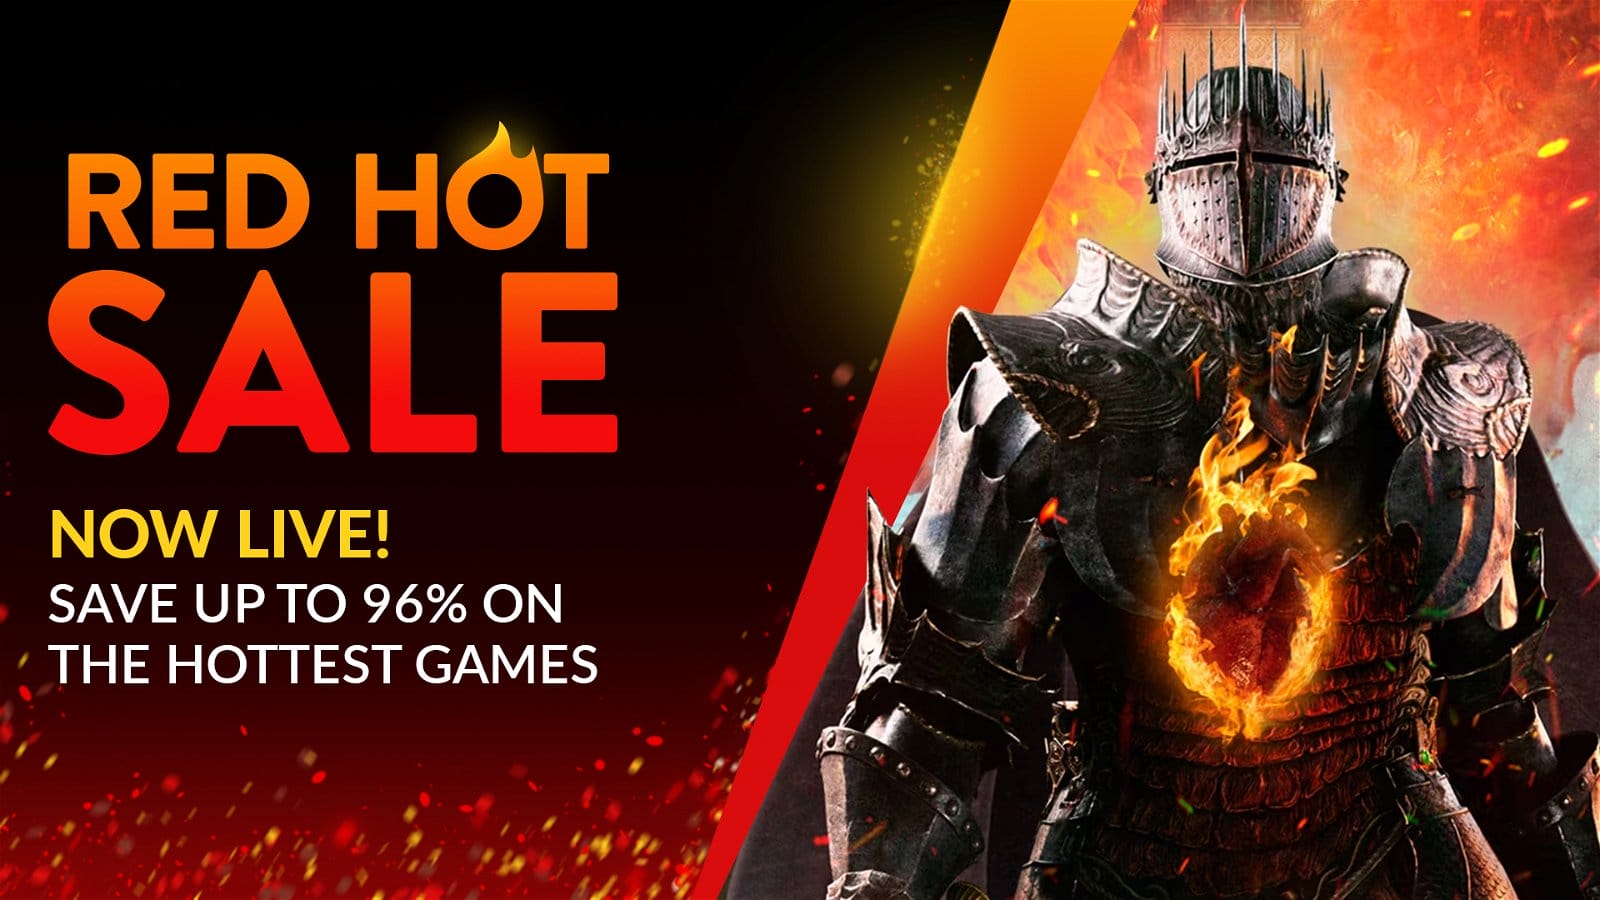 Red Hot Sale now live! Save up to 96% on the hottest games